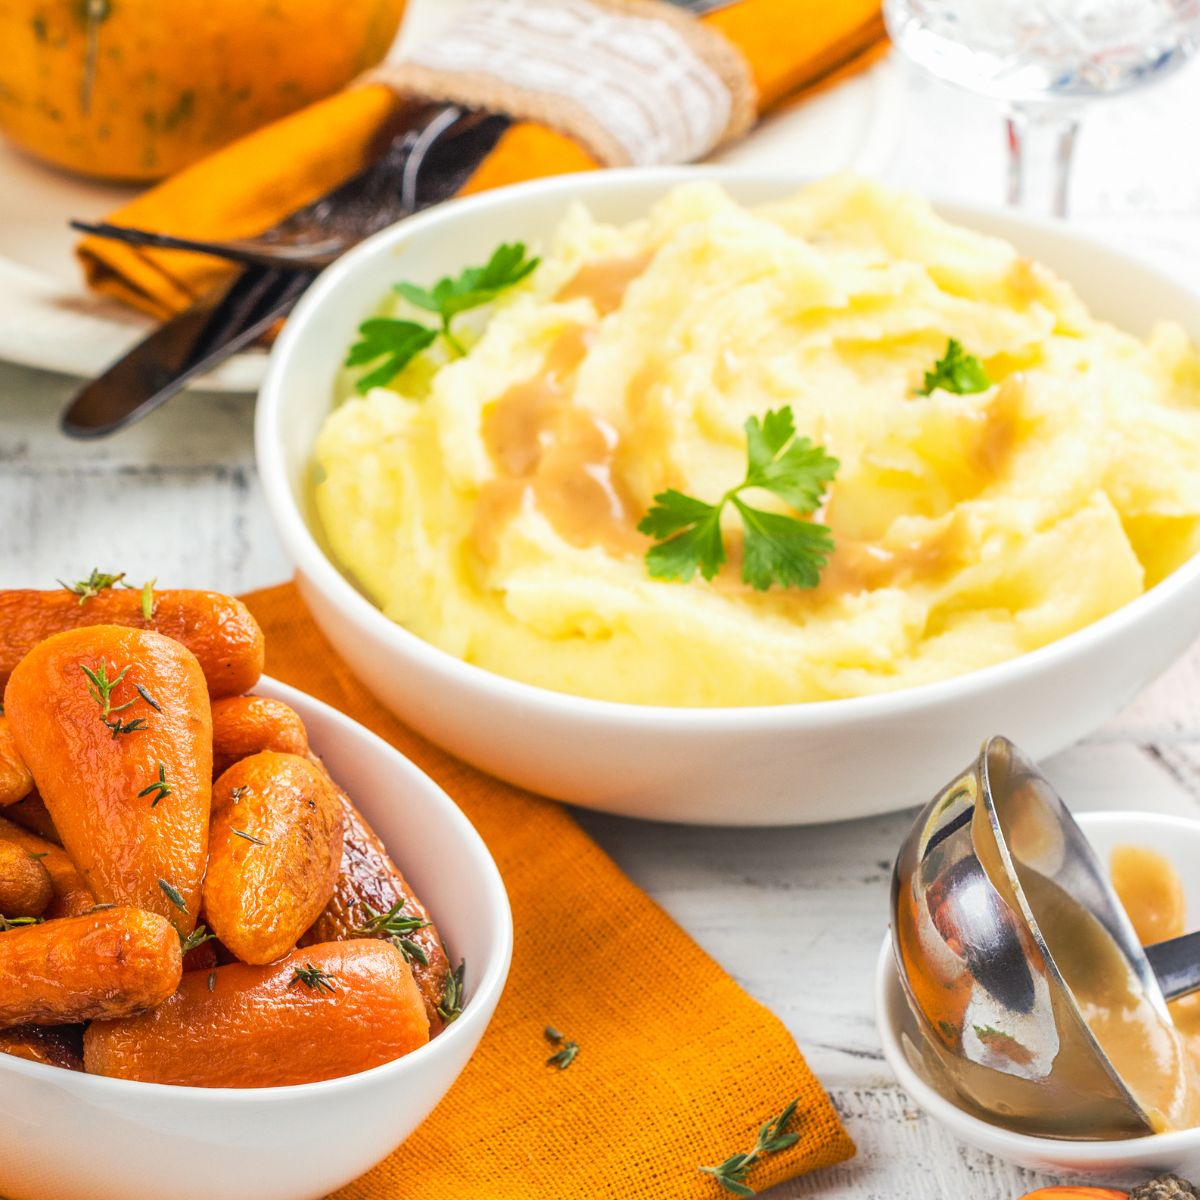 Thanksgiving side dishes: candied carrots and mashed potatoes